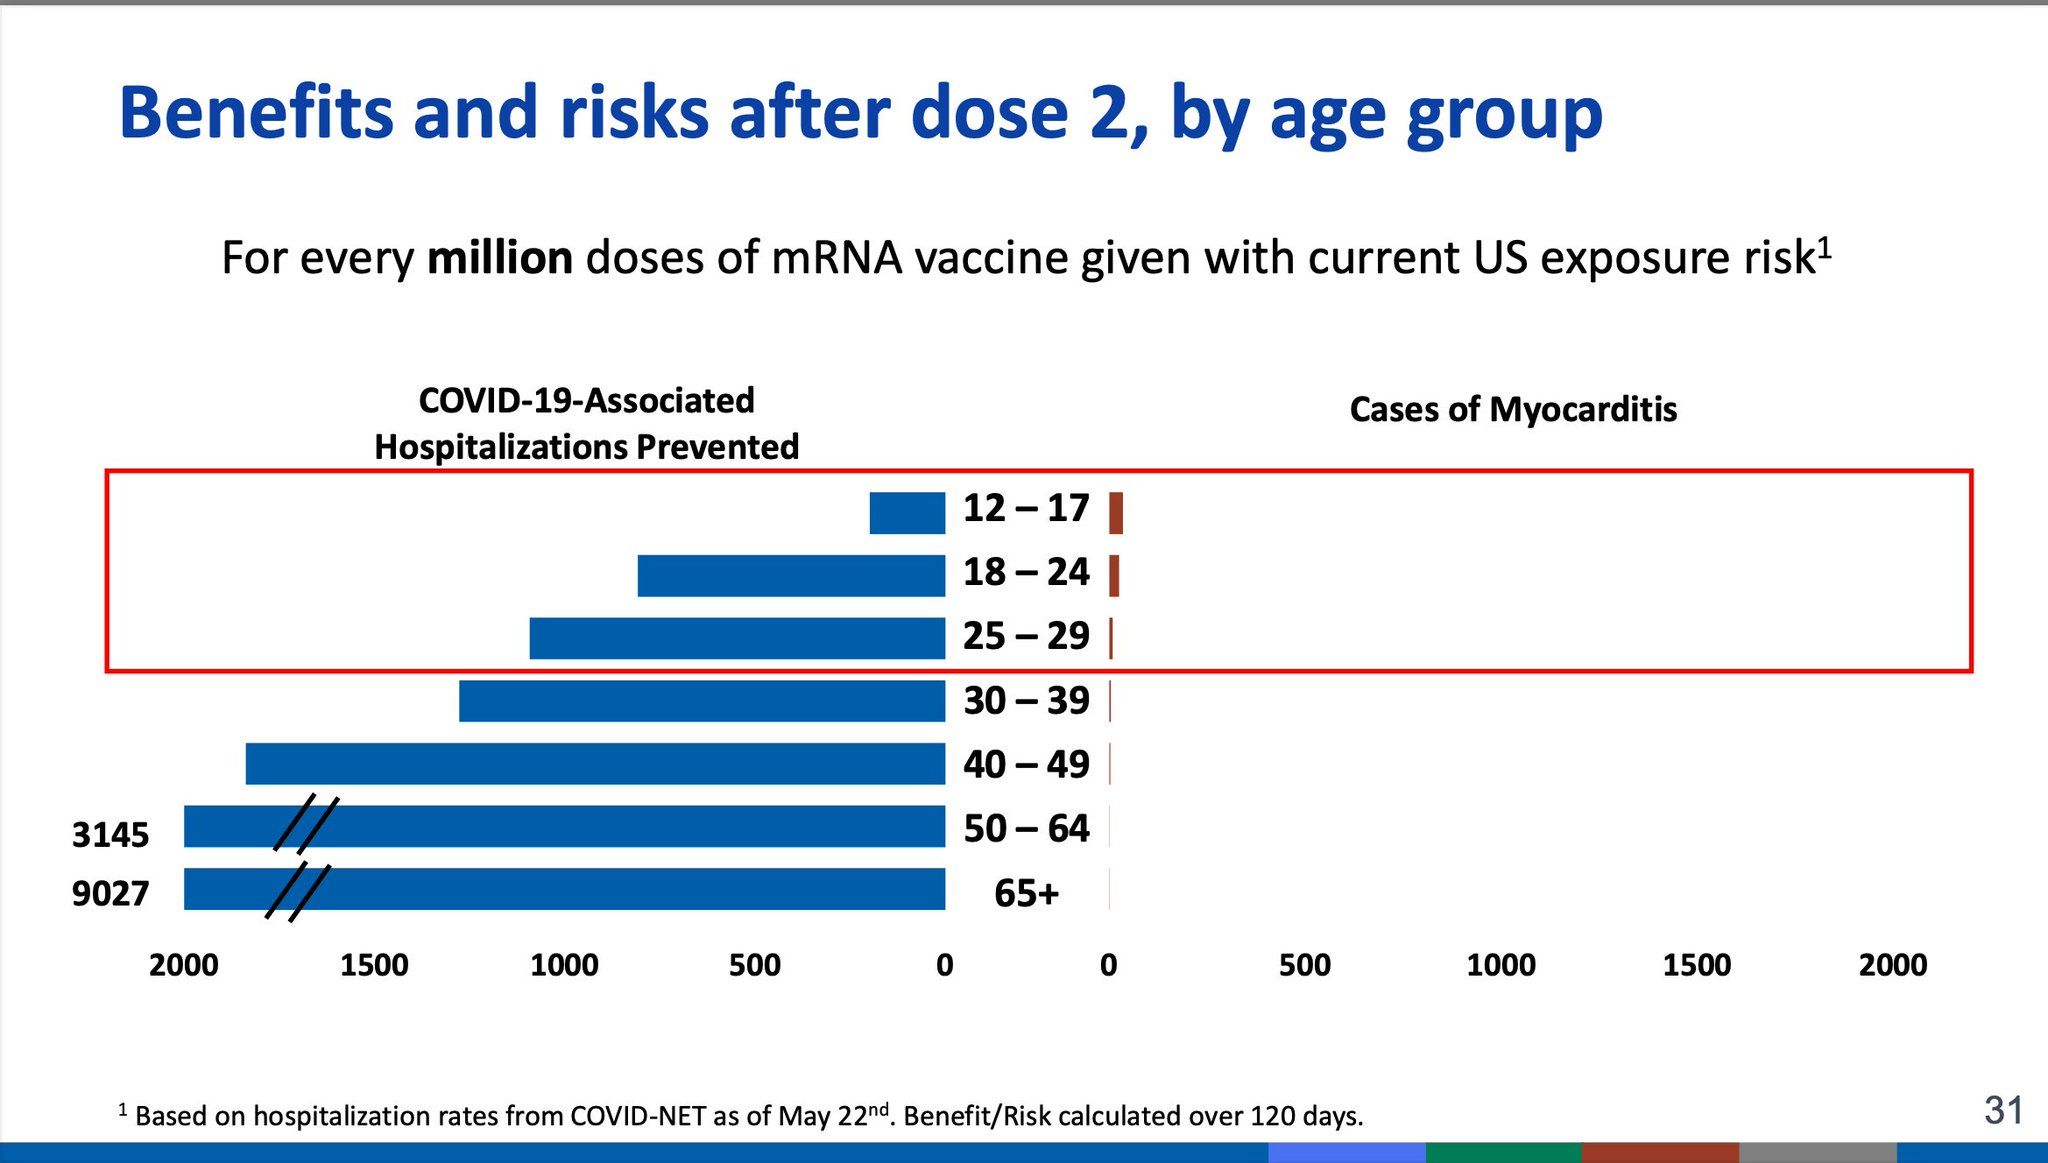 Photo: COVID-19 mRNA vaccines in adolescents and young adults: Benefit-risk discussion slides from the CDC ACIP meeting.